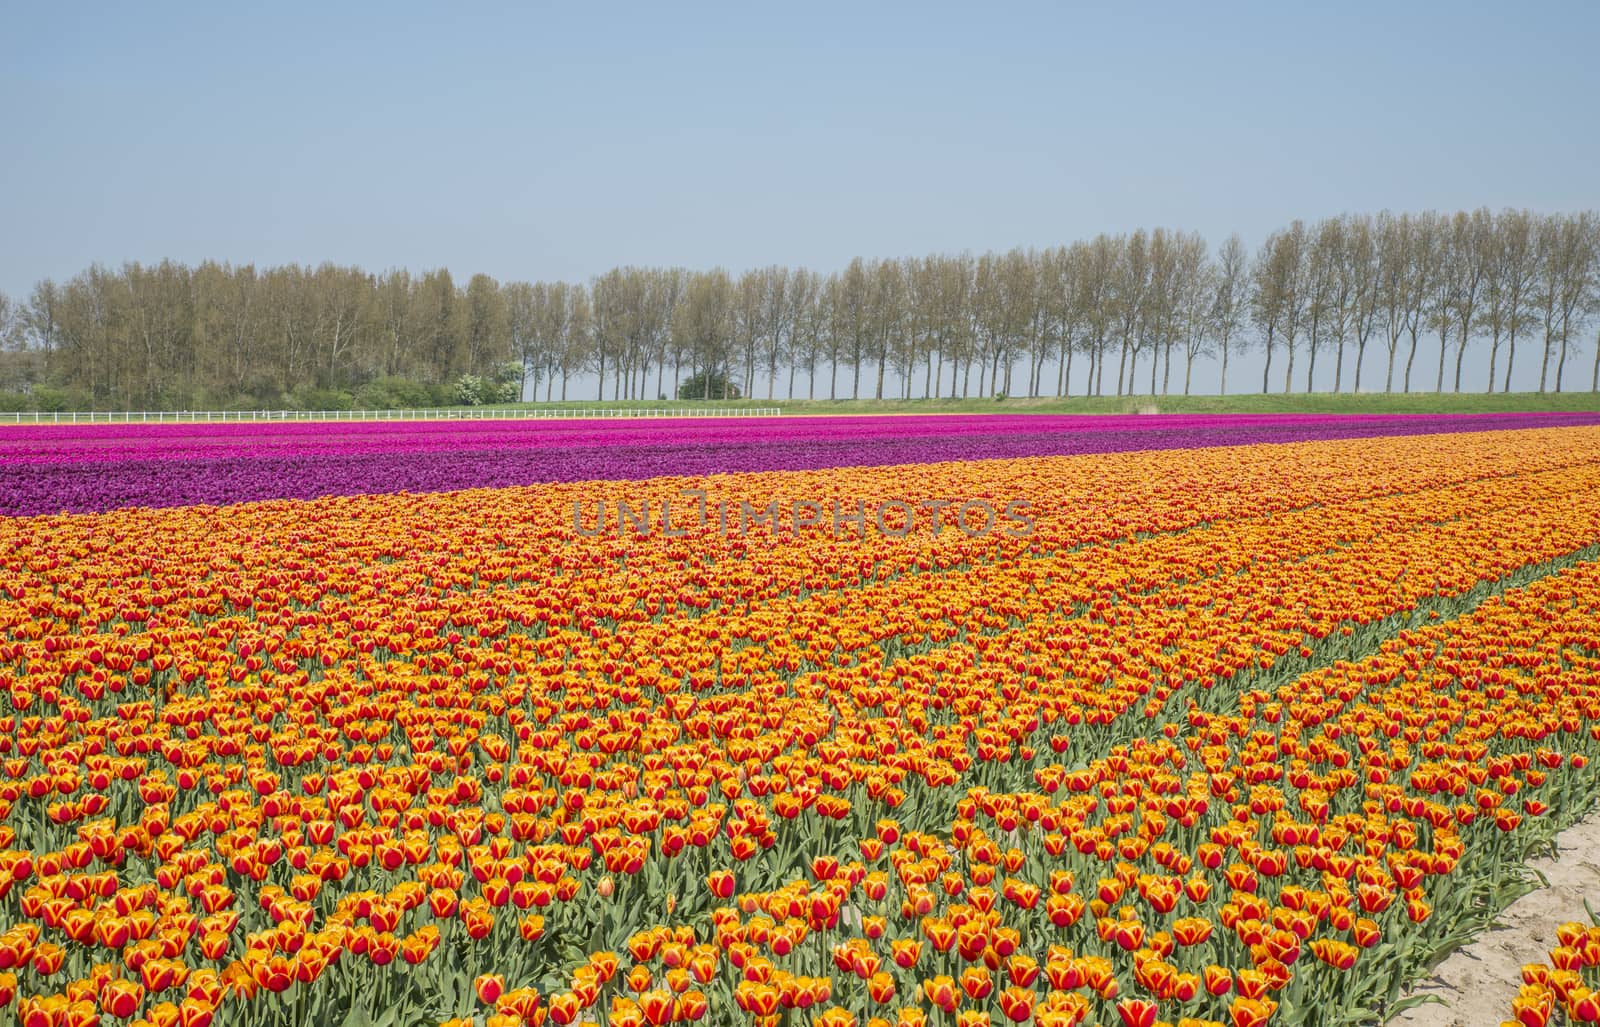 filed of red yellow purple and pink tulips in holland on goeree with single tree at the background in holland